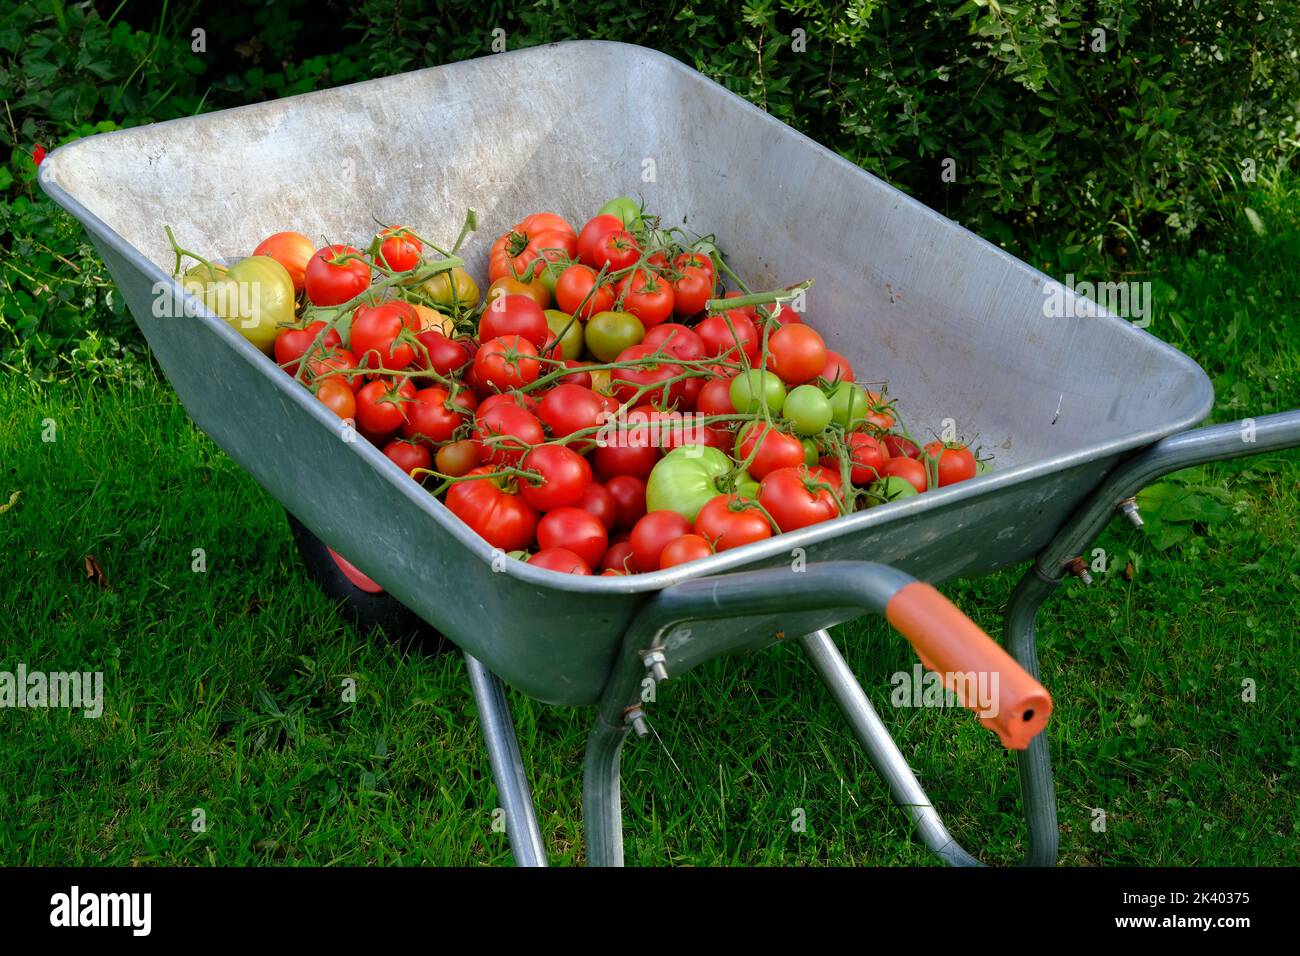 Wheelbarrow with a glut of tomatoes harvested at the end of summer. Stock Photo